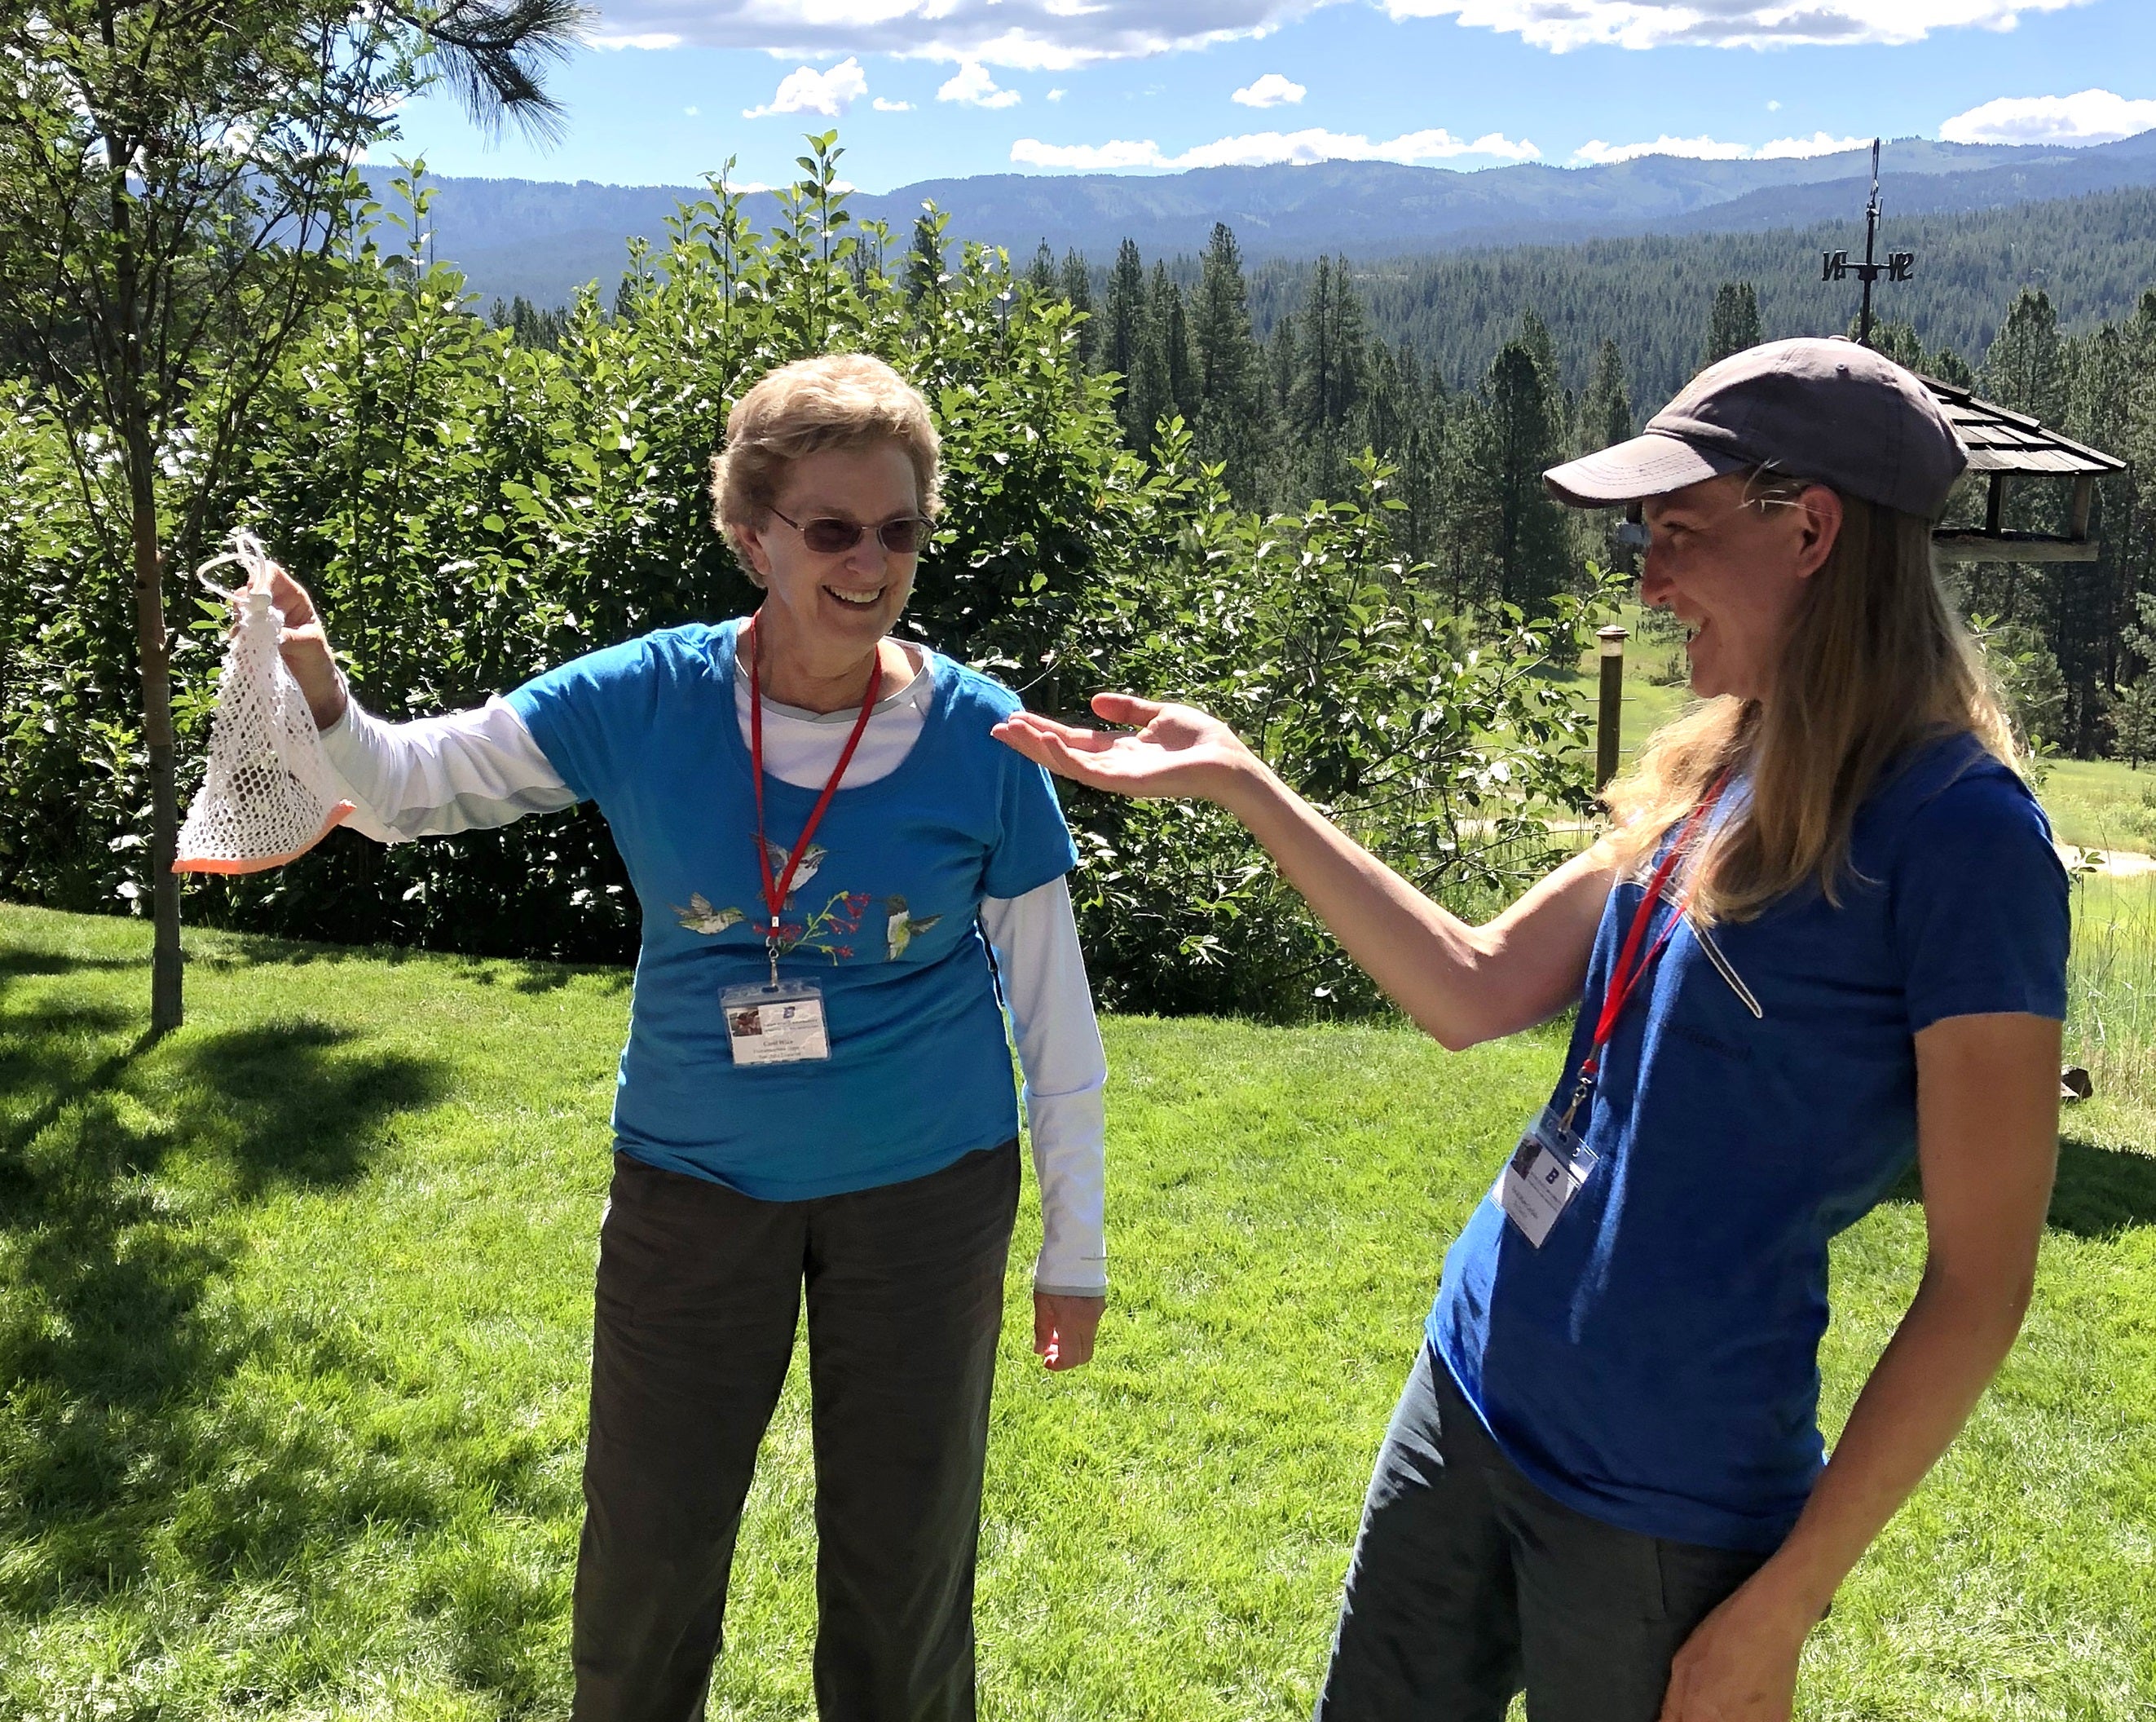 Carol holds a cloth bag high in the air. A small hummingbird can be seen inside